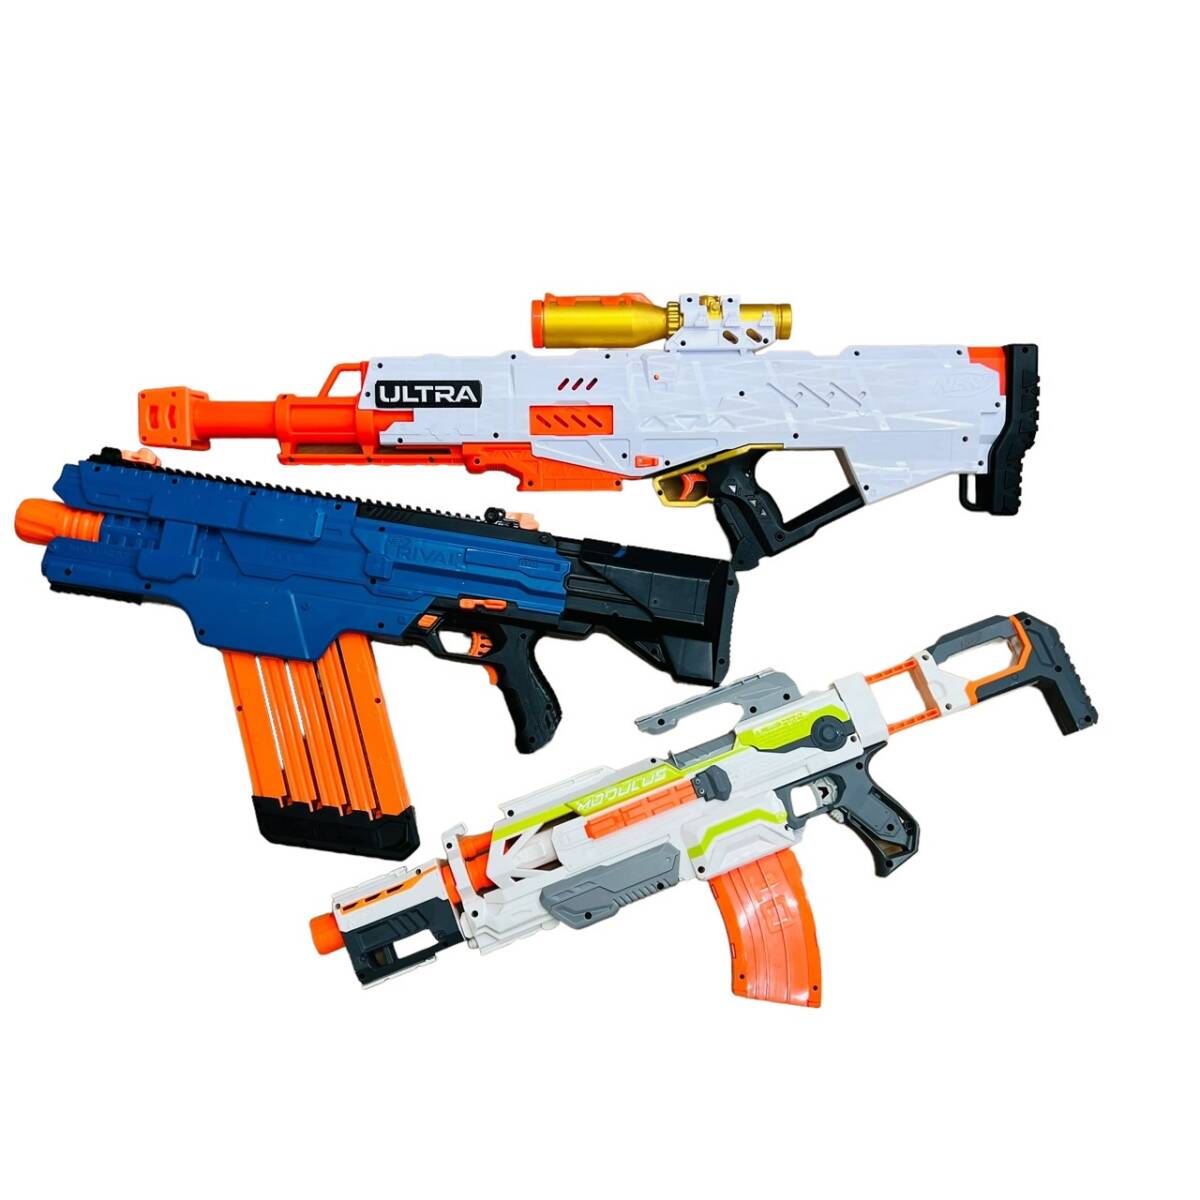 [ present condition goods ]NERF HASBROna-f is zbro gun type toy set sale sponge parts part removing operation not yet verification 